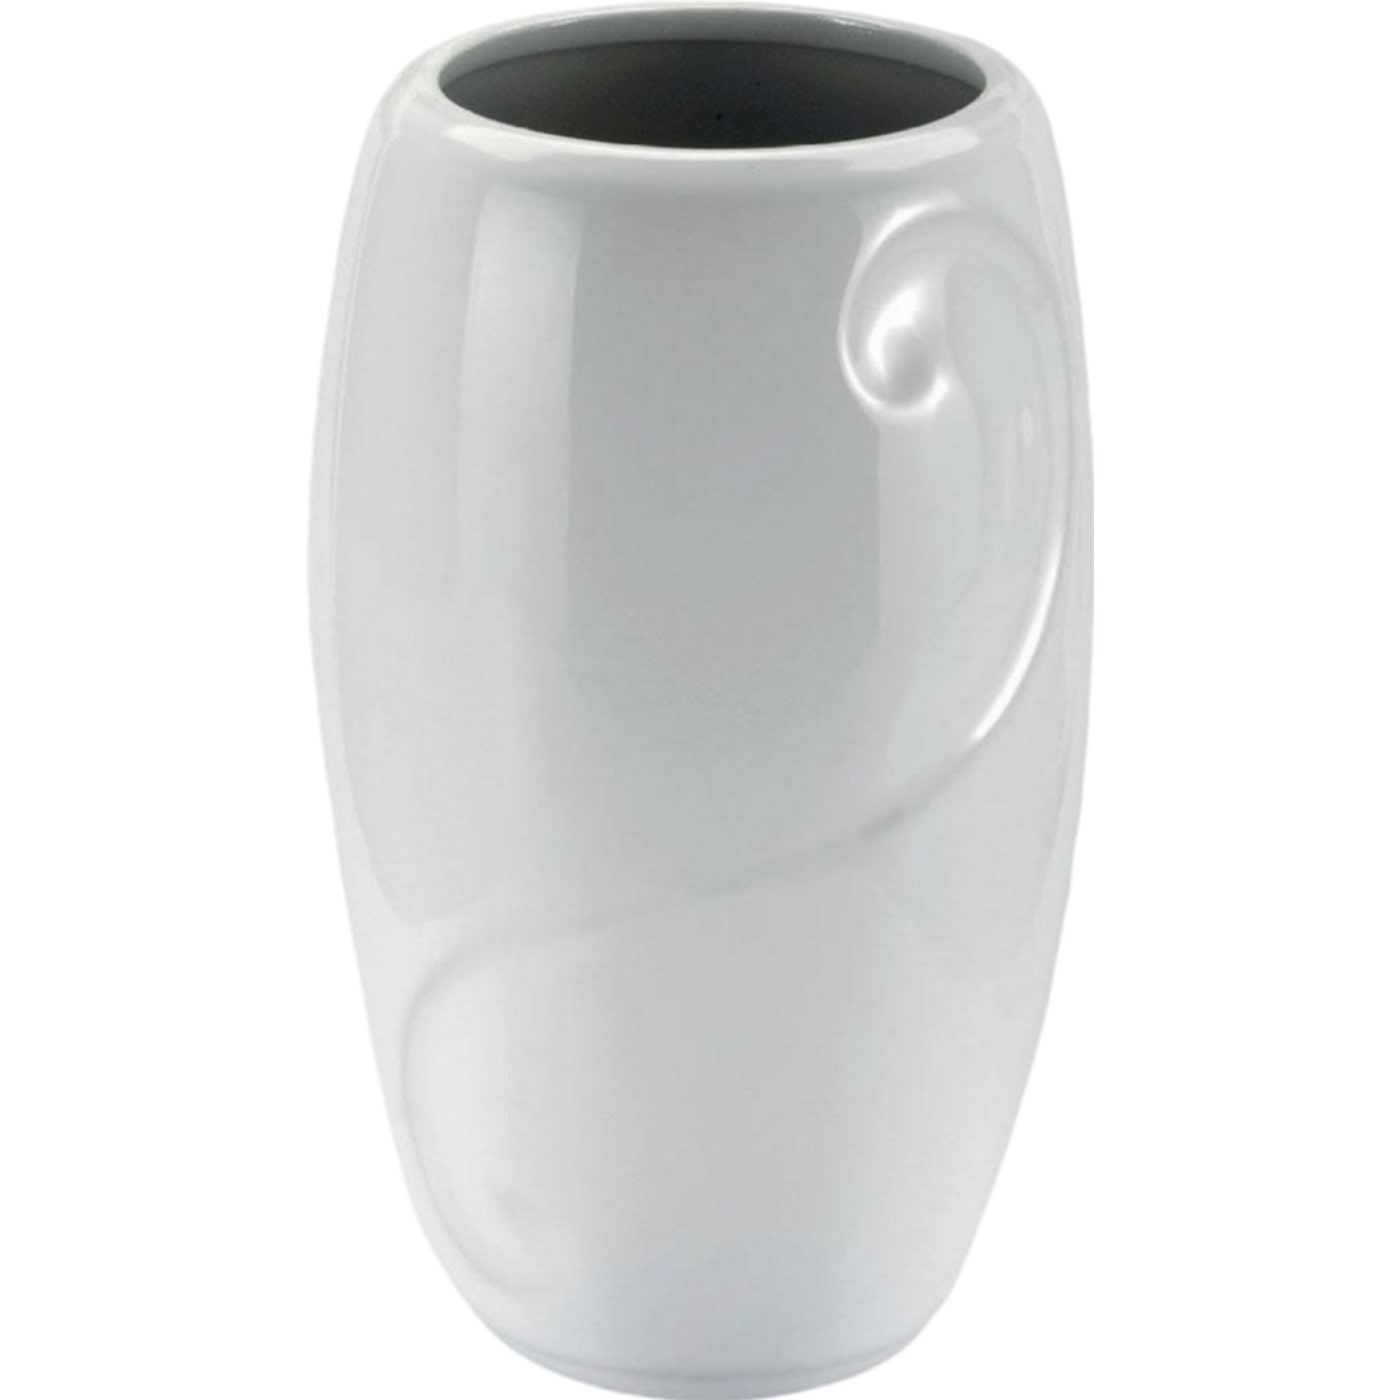 Grave vase Sharon 21x13cm - 8.3x5.1in In white porcelain, ground attached SH124T